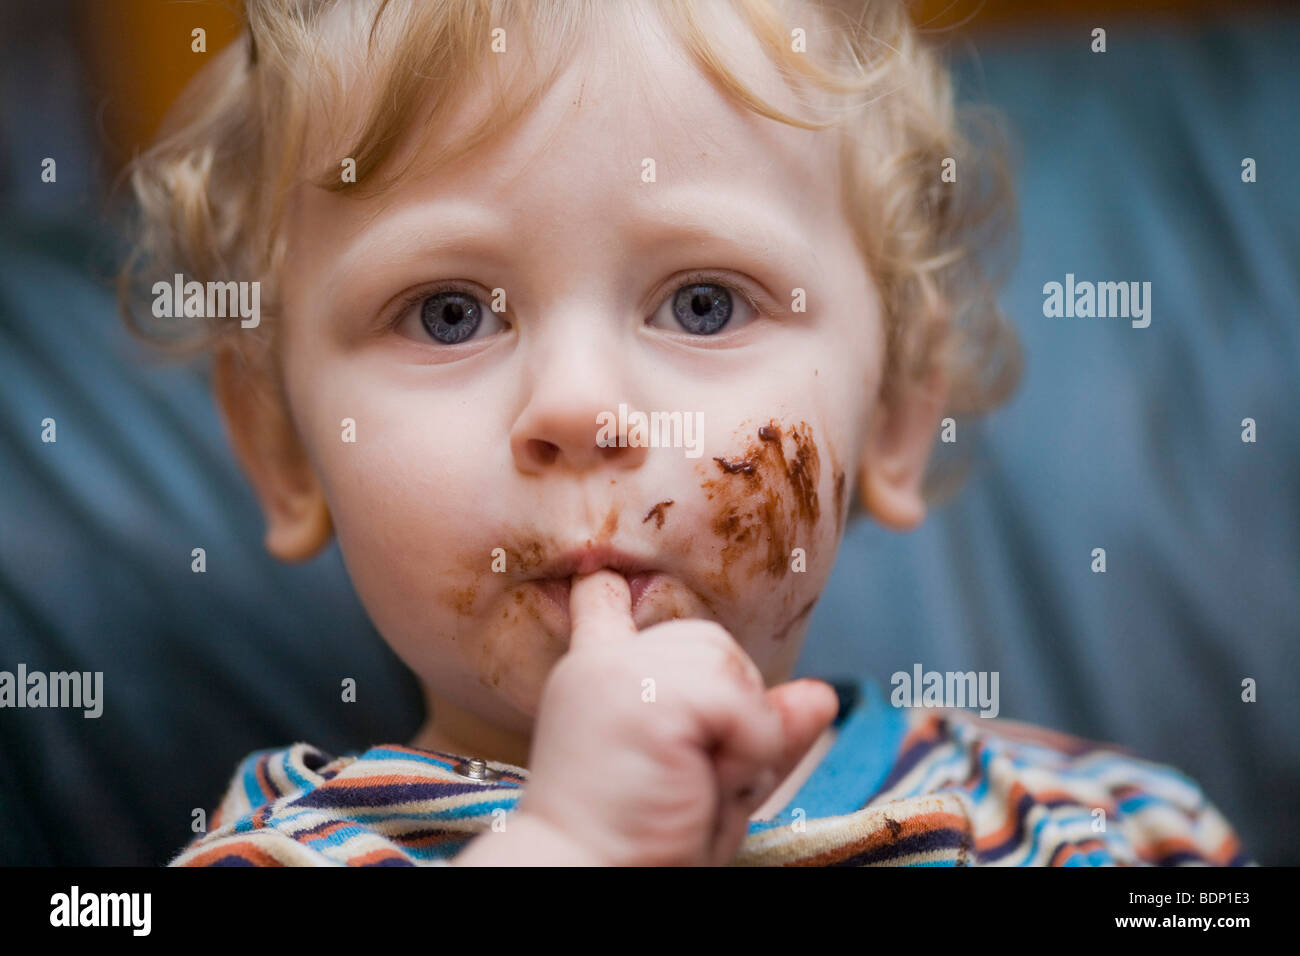 One-year boy with chocolate covered fingers Stock Photo